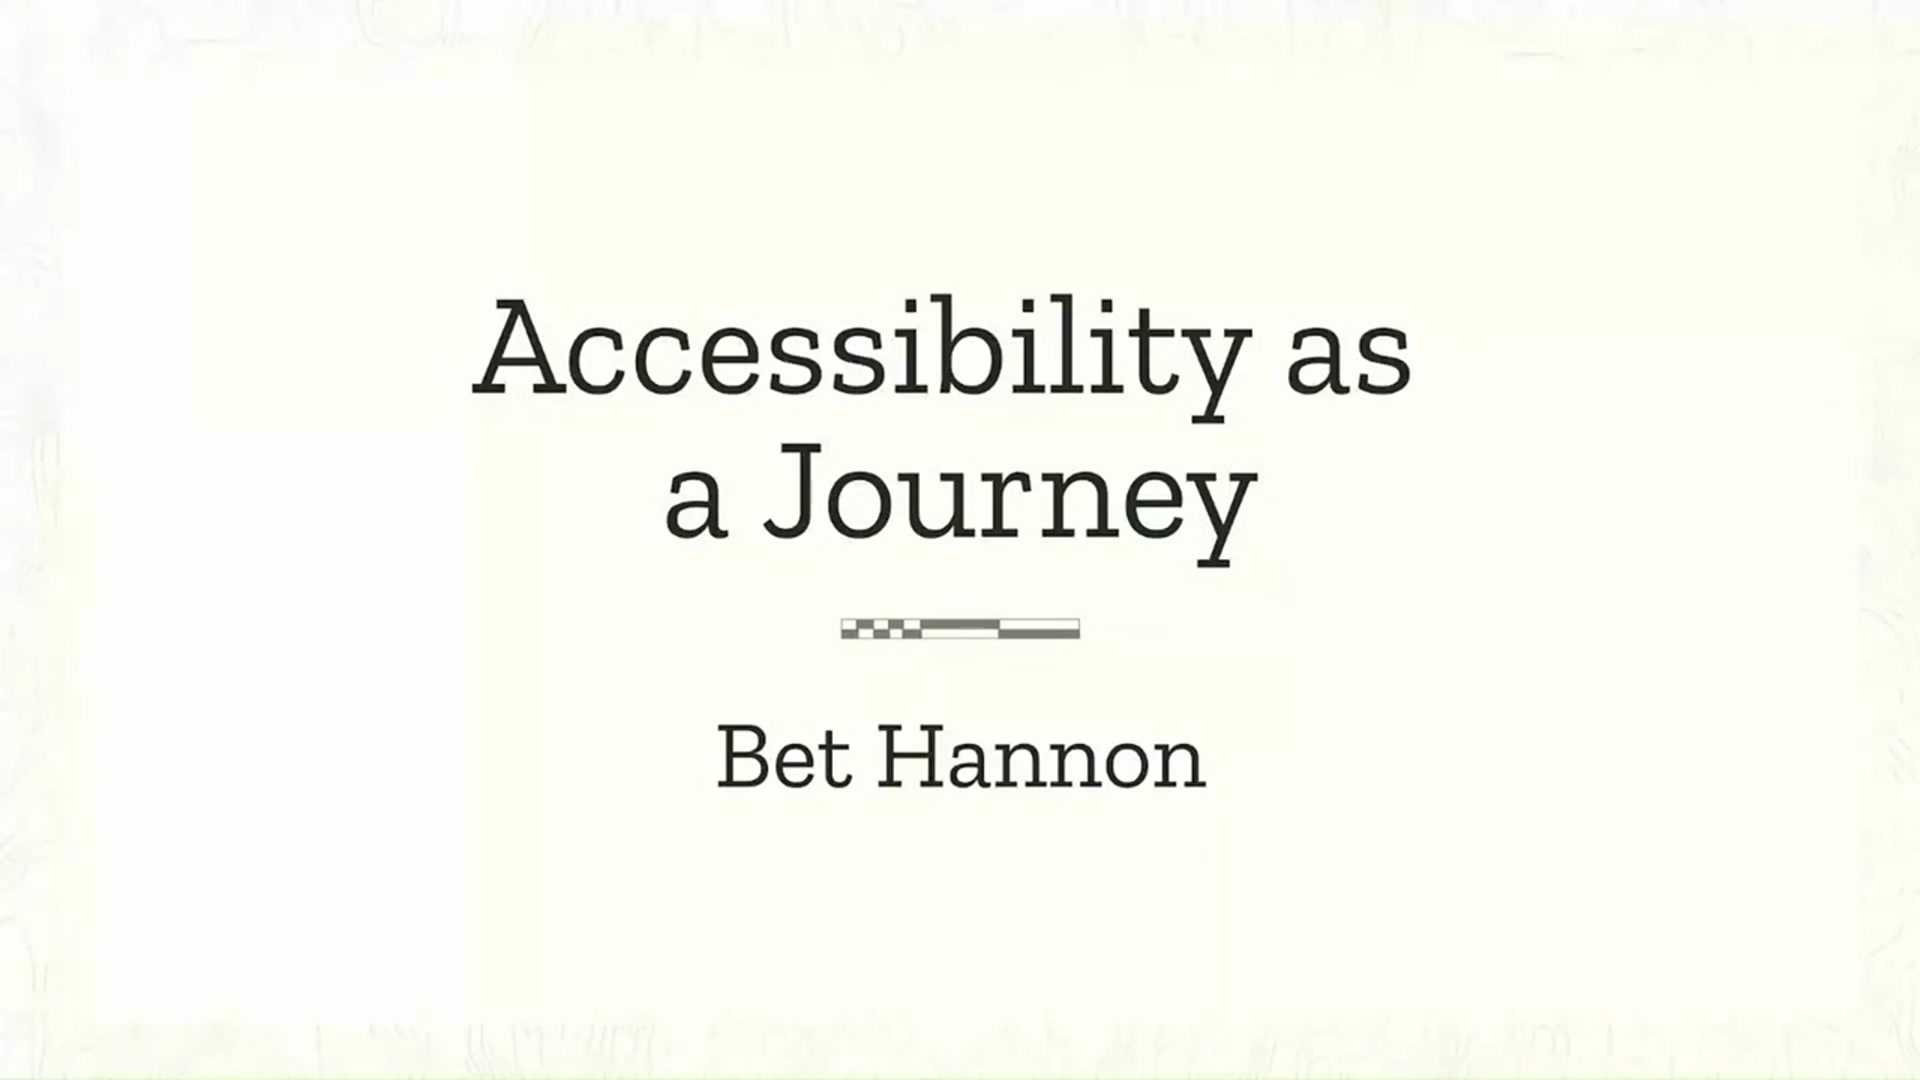 Bet Hannon: Accessibility as a journey: rationales & practical tips for making sites accessible